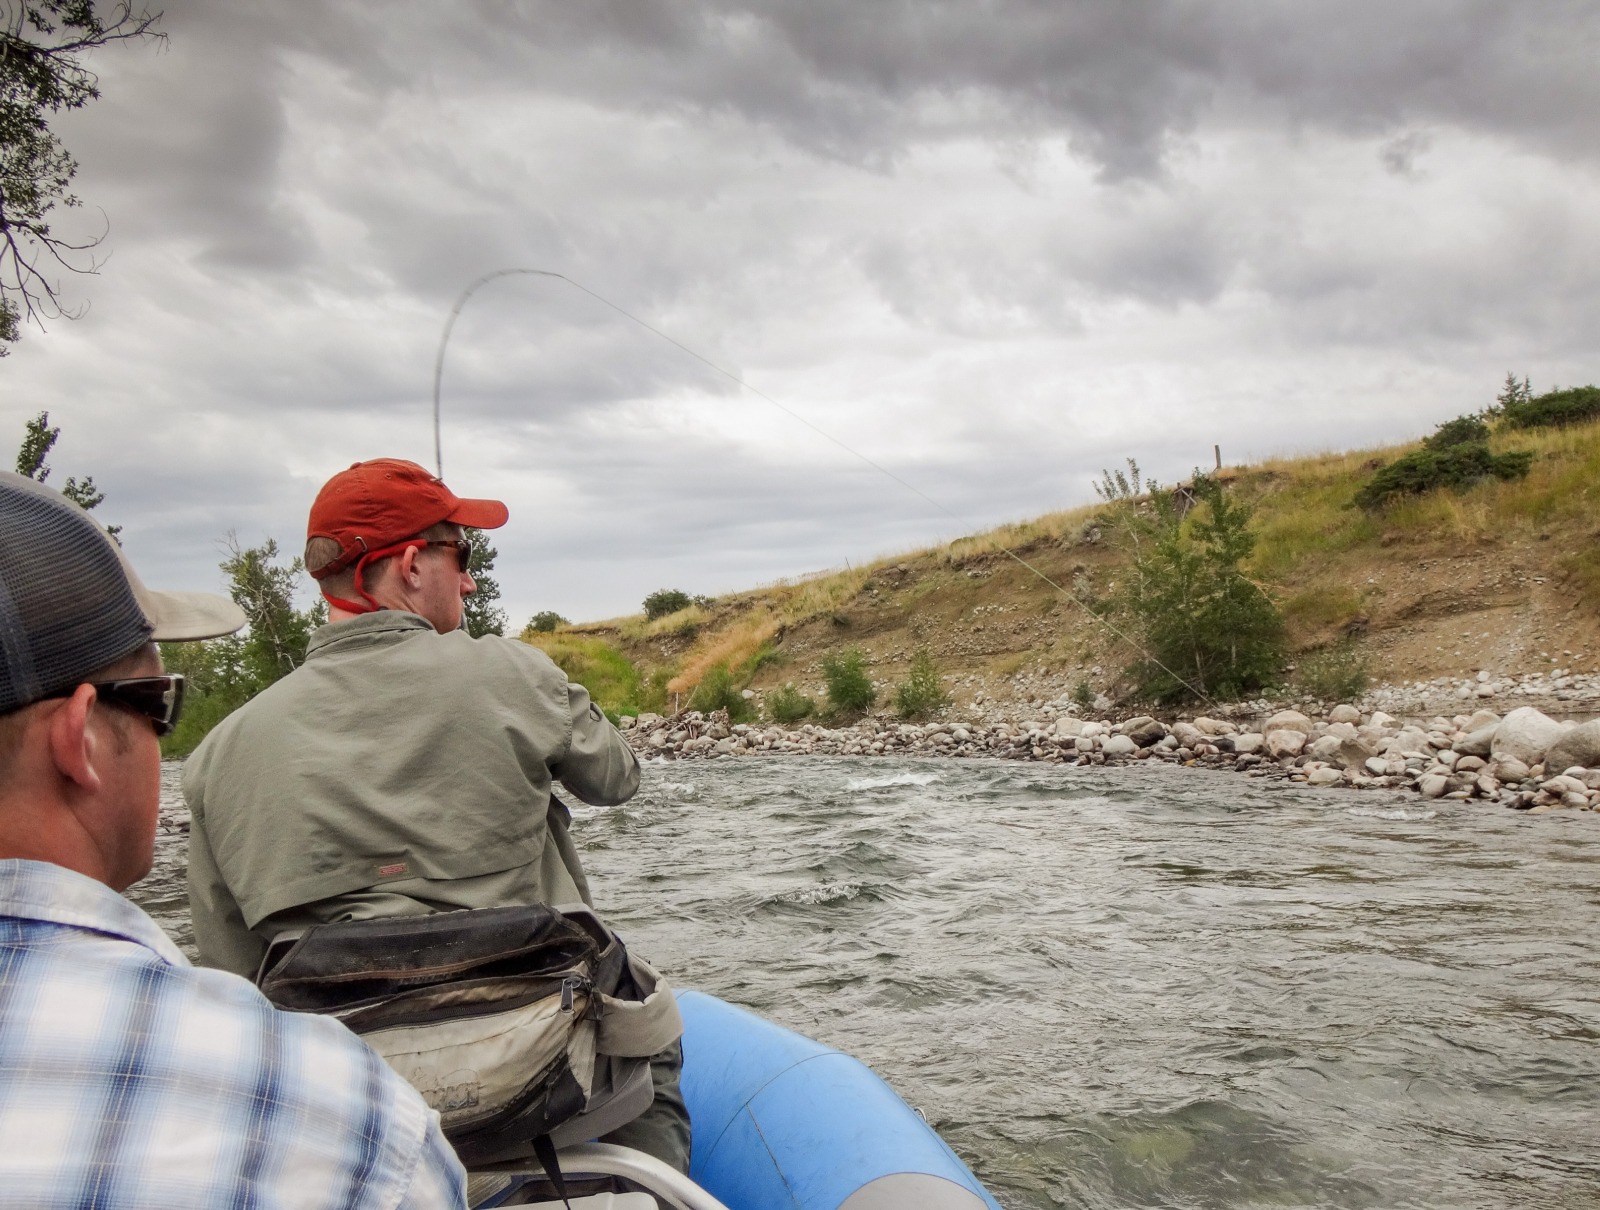 Man in green shirt with a red hat is on a raft with a fishing rod bent because it has hooked a fish, grey cloudy skies in the background with a grassy riverbank.